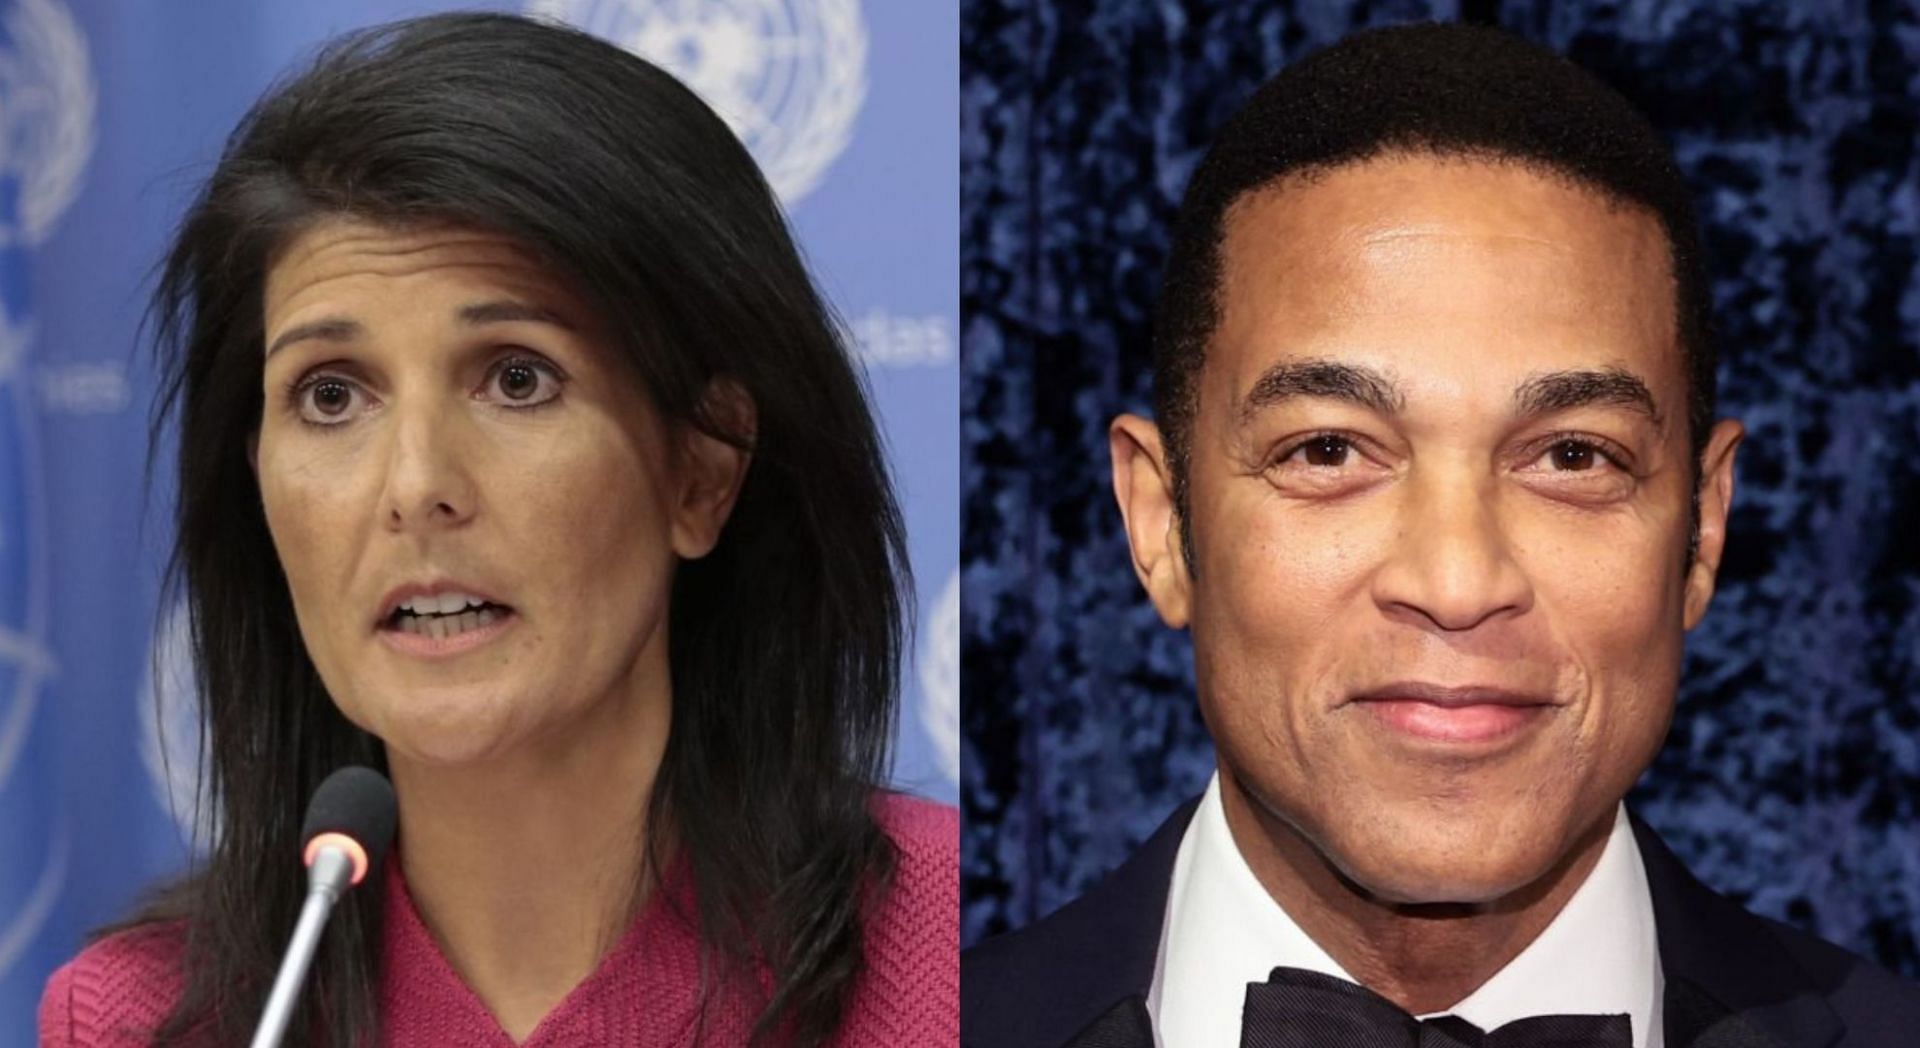 What did Don Lemon say about Nikki Haley? Women in their prime comment  sparks call for CNN anchor's firing